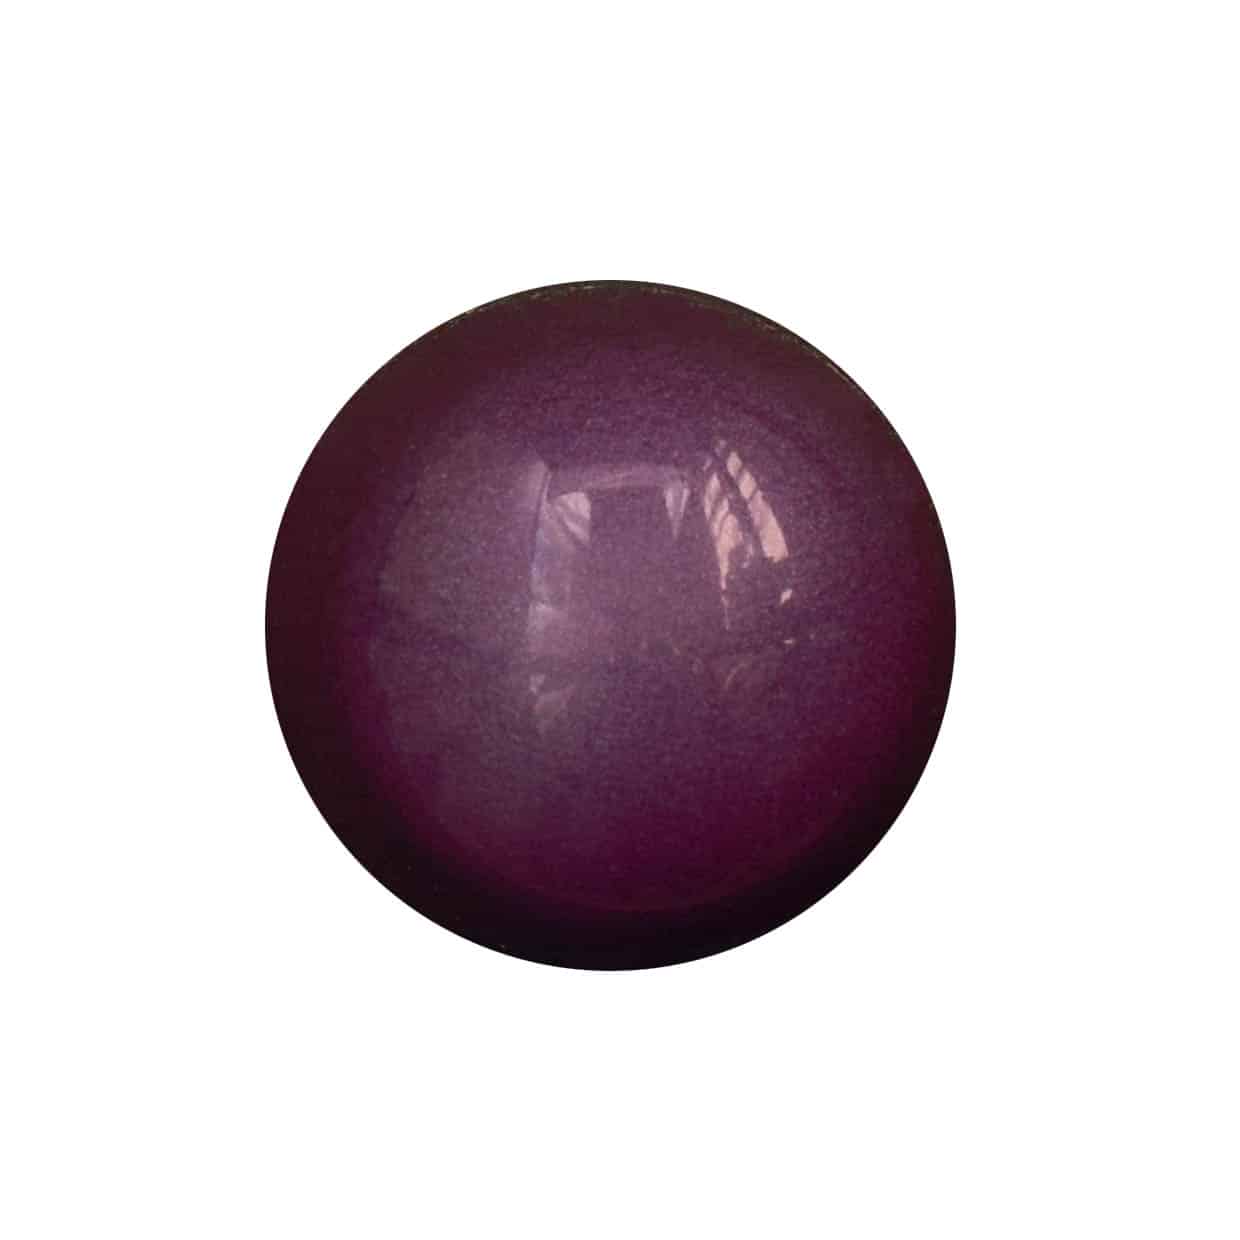 Overhead view of a purple-colored gourmet chocolate bonbon that is flavored with Cherry Cheesecake